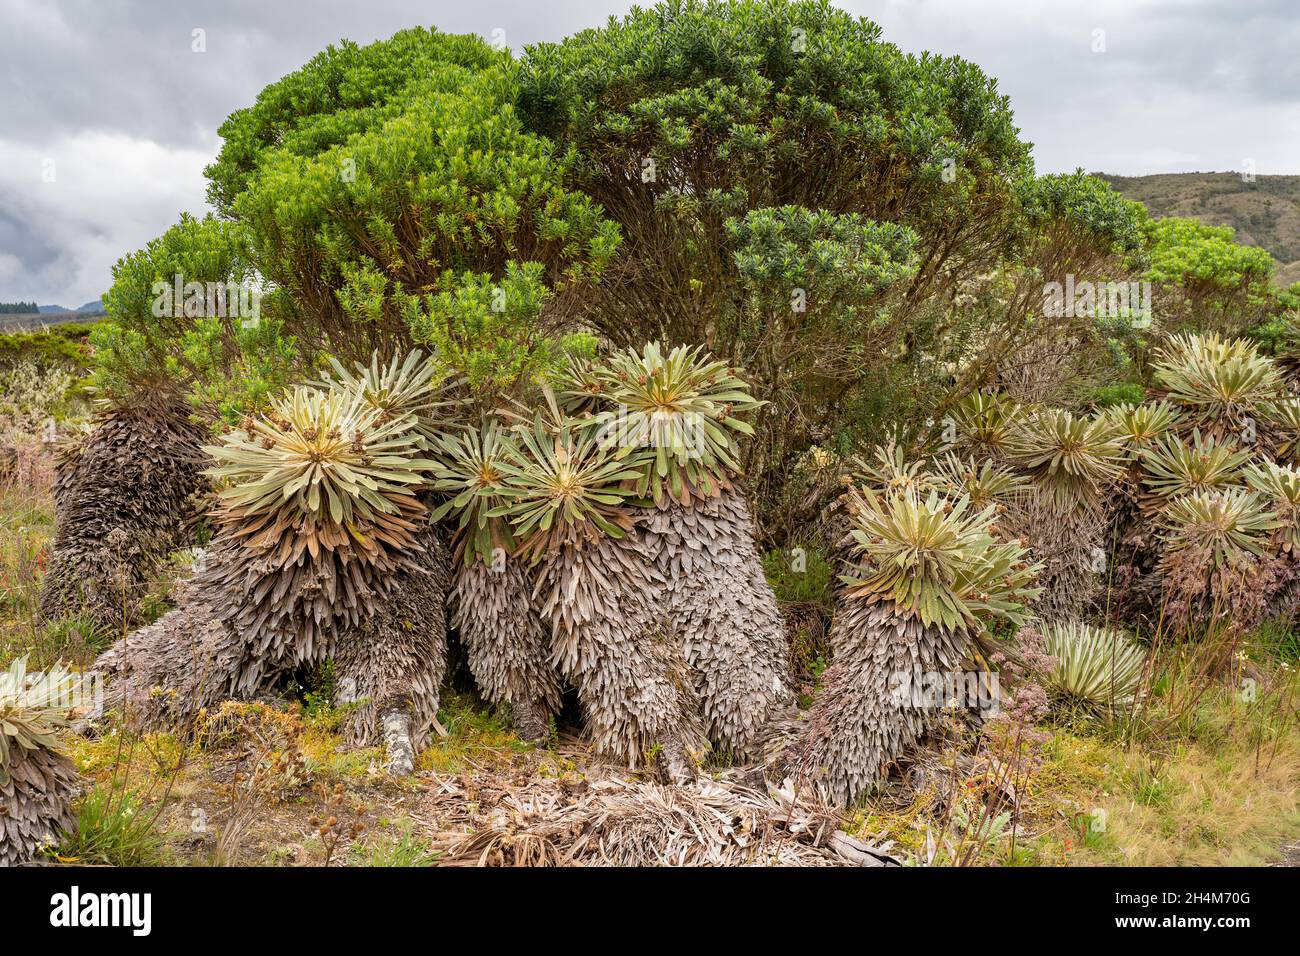 Hike to Paramo de Guacheneque. Espeletia (frailejones) is a genus of plants from the Asteraceae family, endemic to the páramo in the Andes. Stock Photo